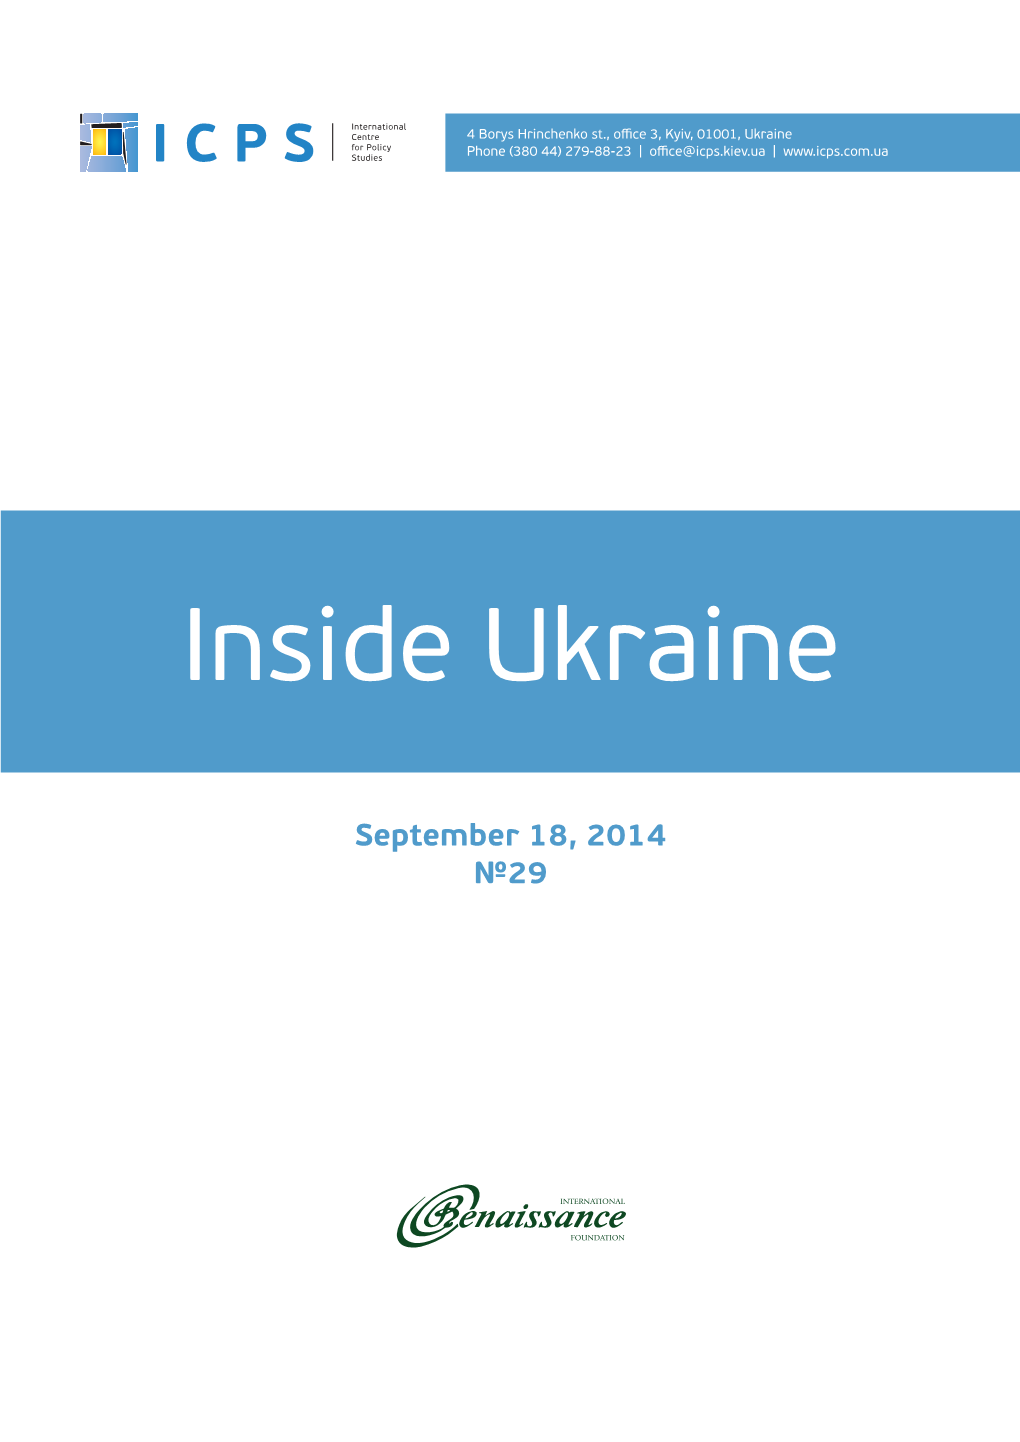 Inside Ukraine 29 the Government Policy on September 16, 2014, It Was a Very Produc- Cation of the Deep and Comprehensive Free Trade Tive Day in the Parliament